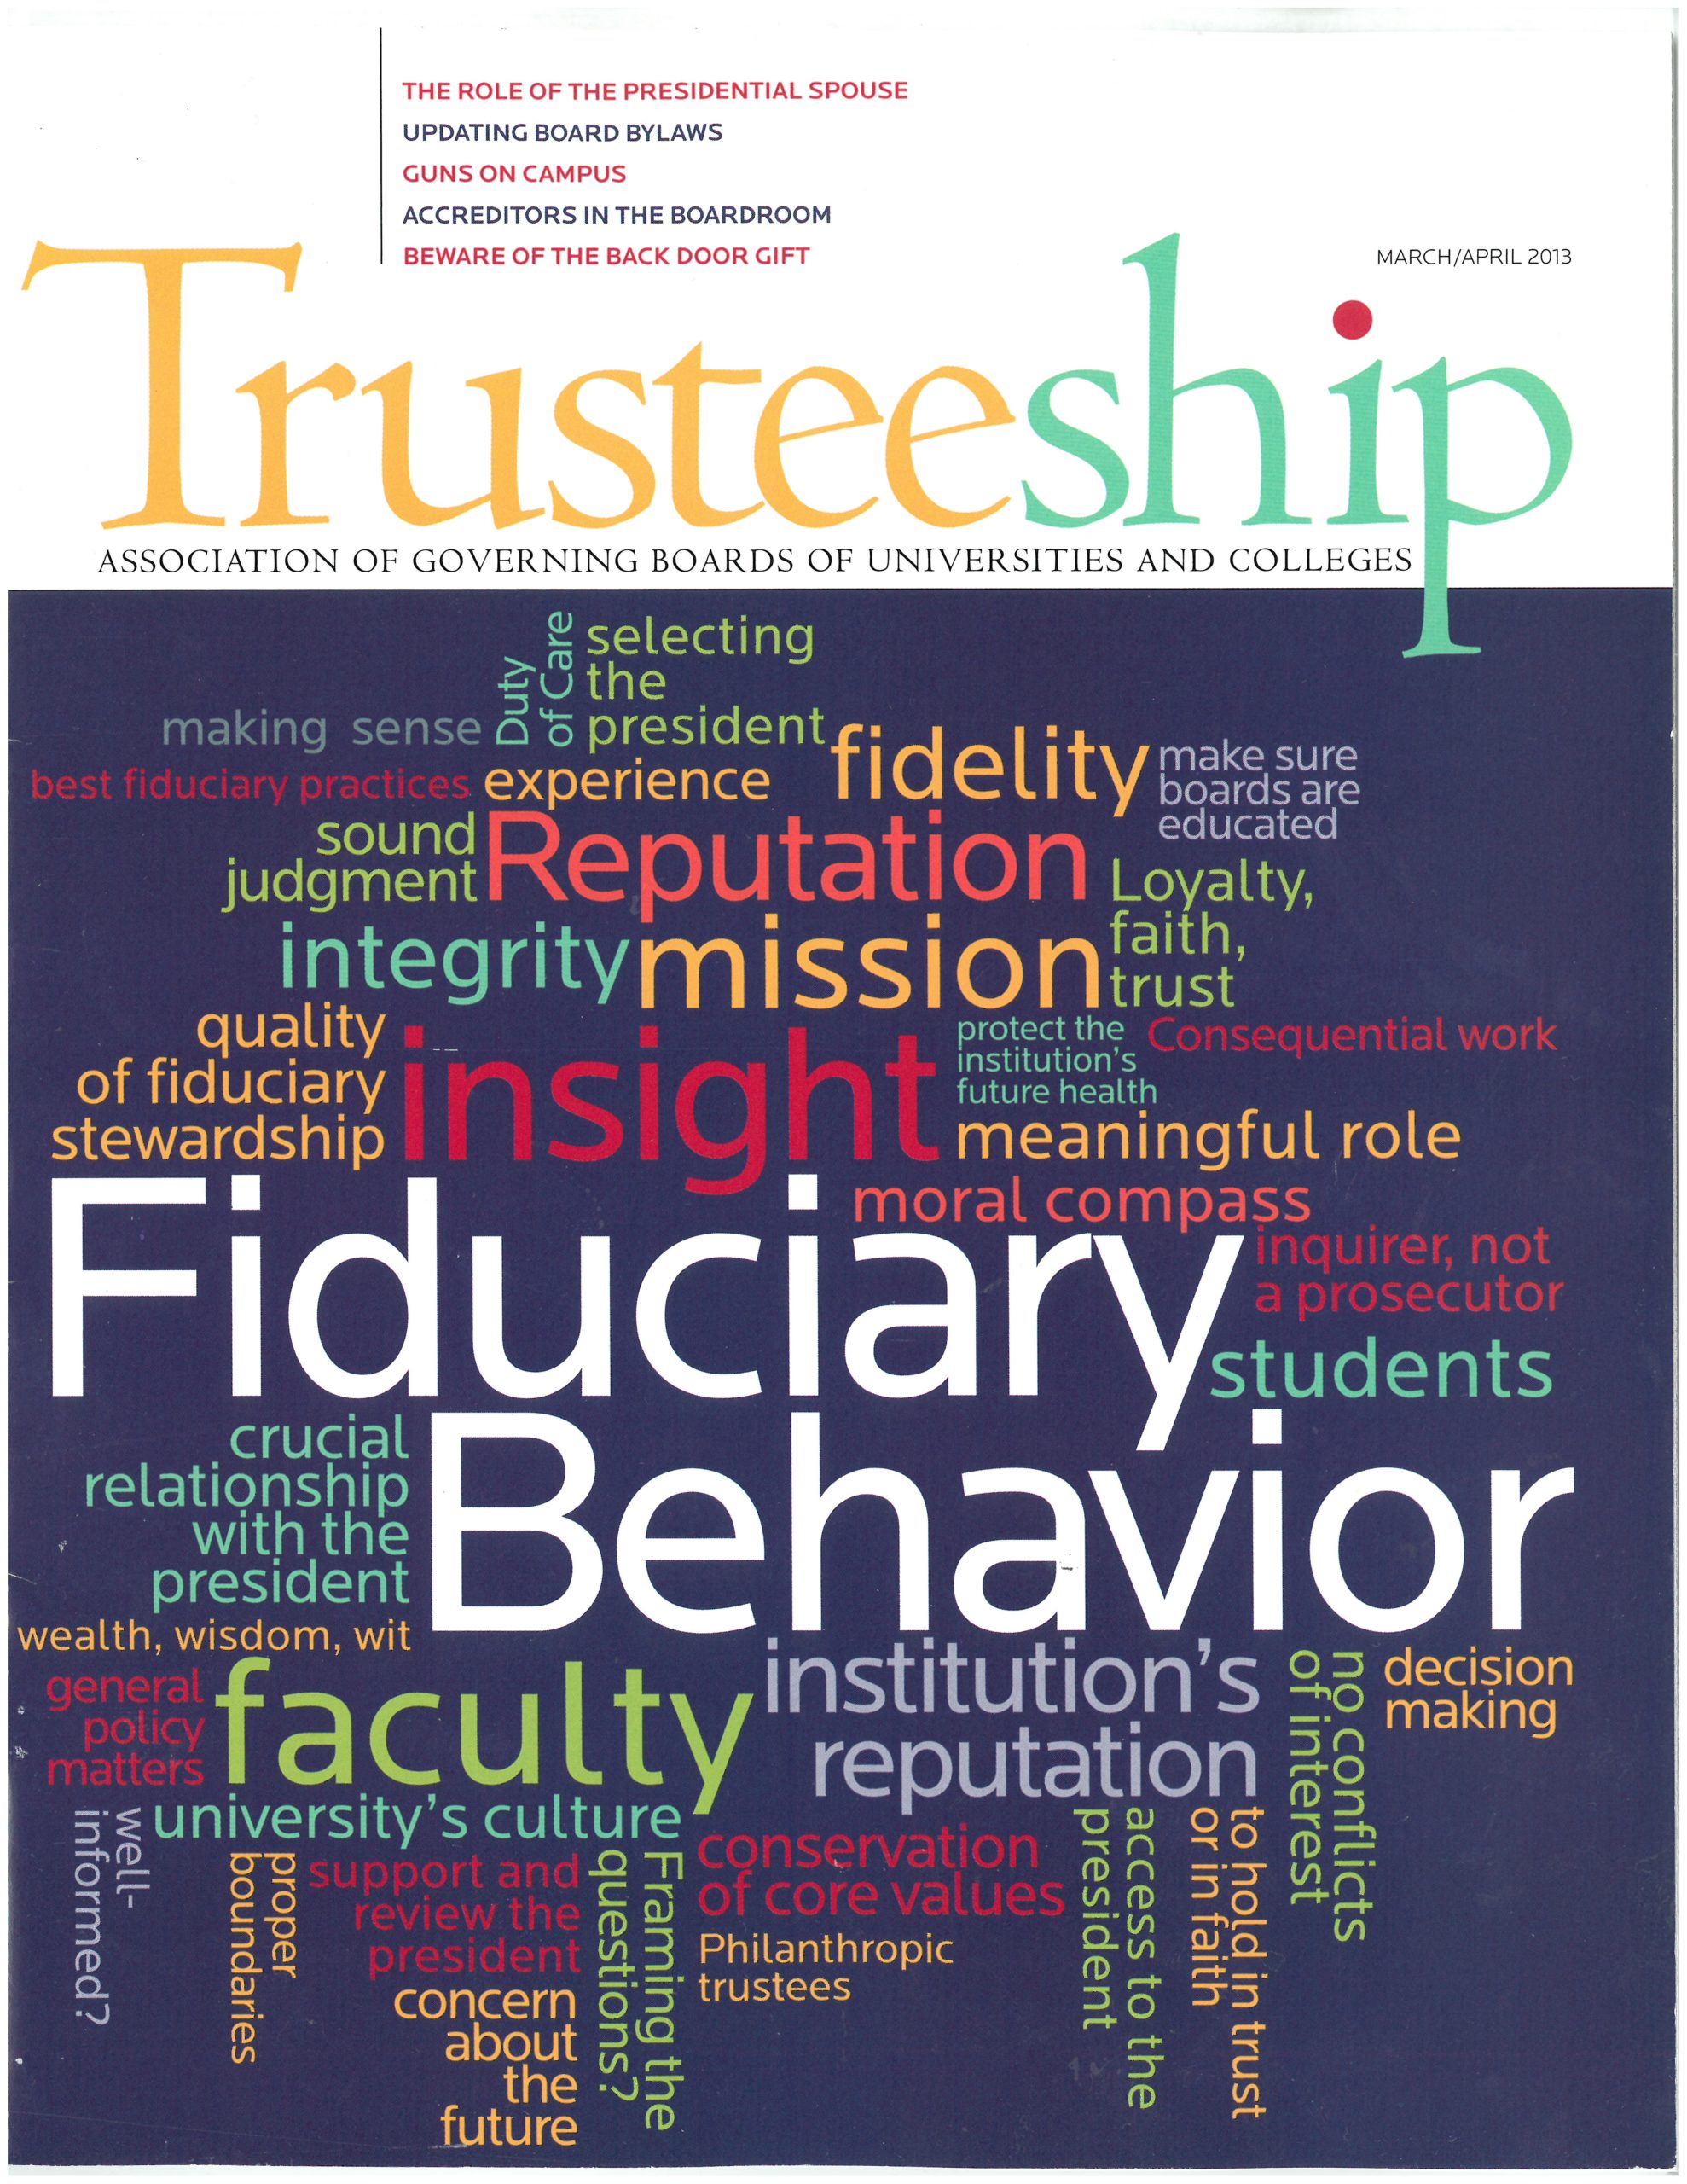 AGB Trusteeship Magazine March/April 2013 with cover article "Fiduciary Behavior"